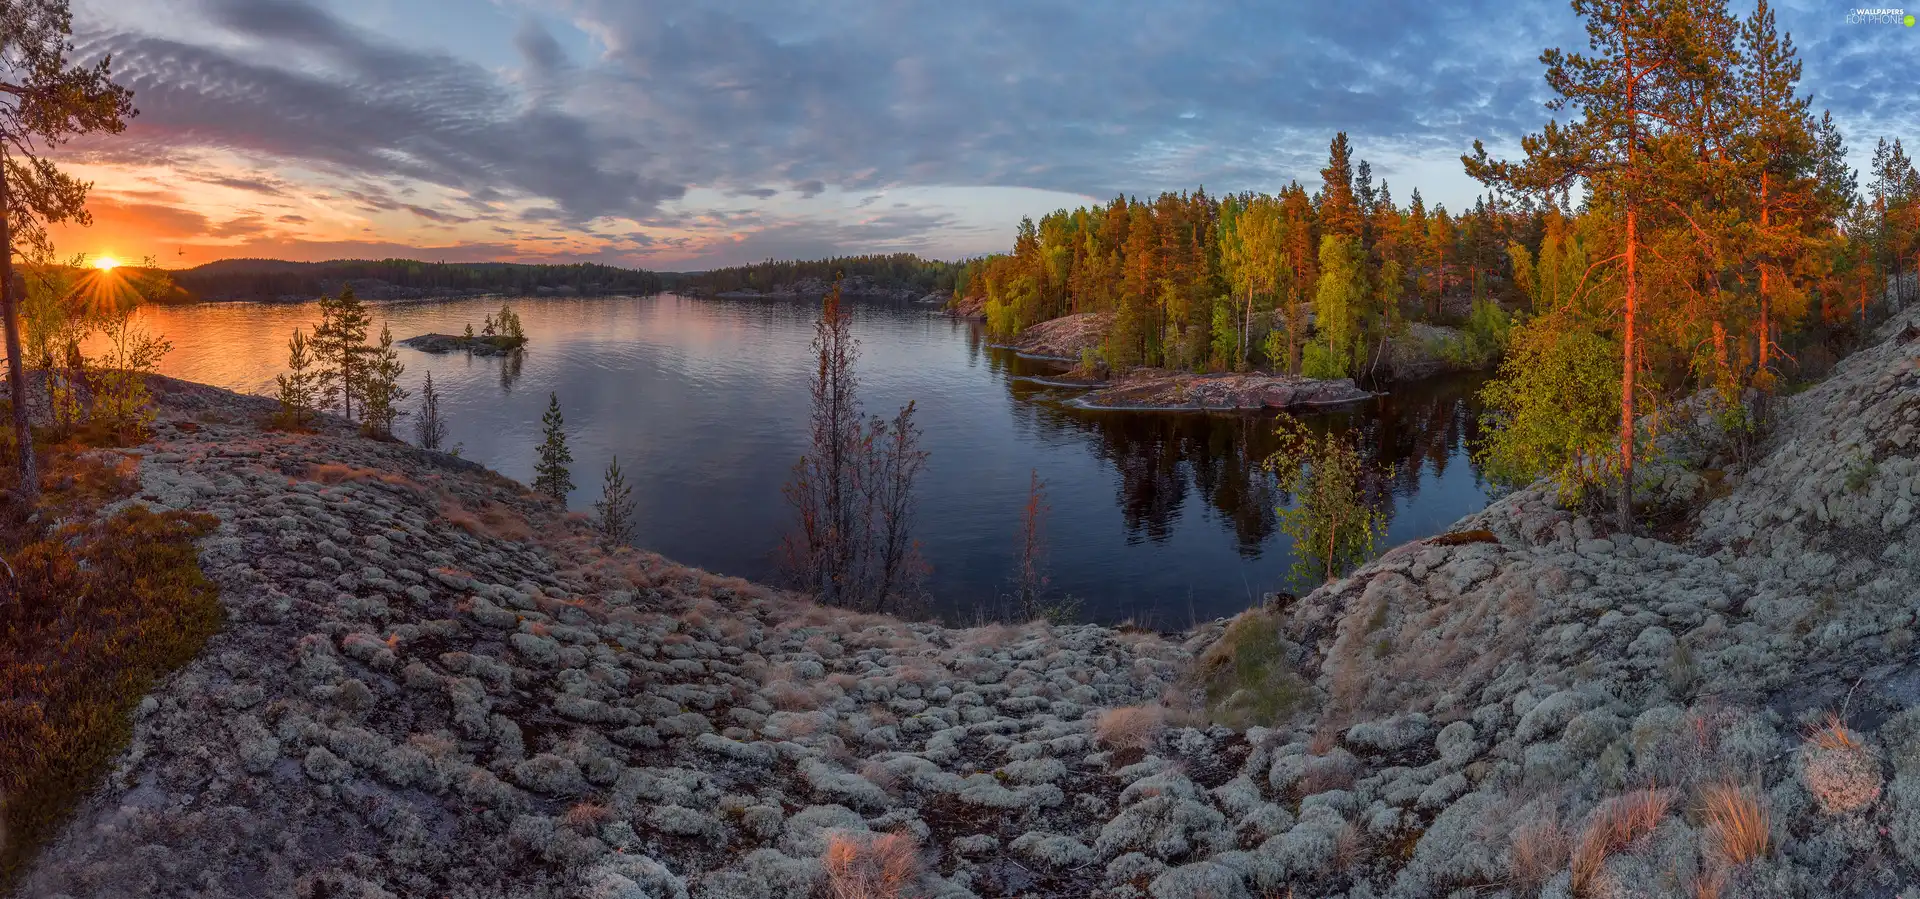 viewes, forest, Russia, Great Sunsets, Karelia, trees, Lake Ladoga, clouds